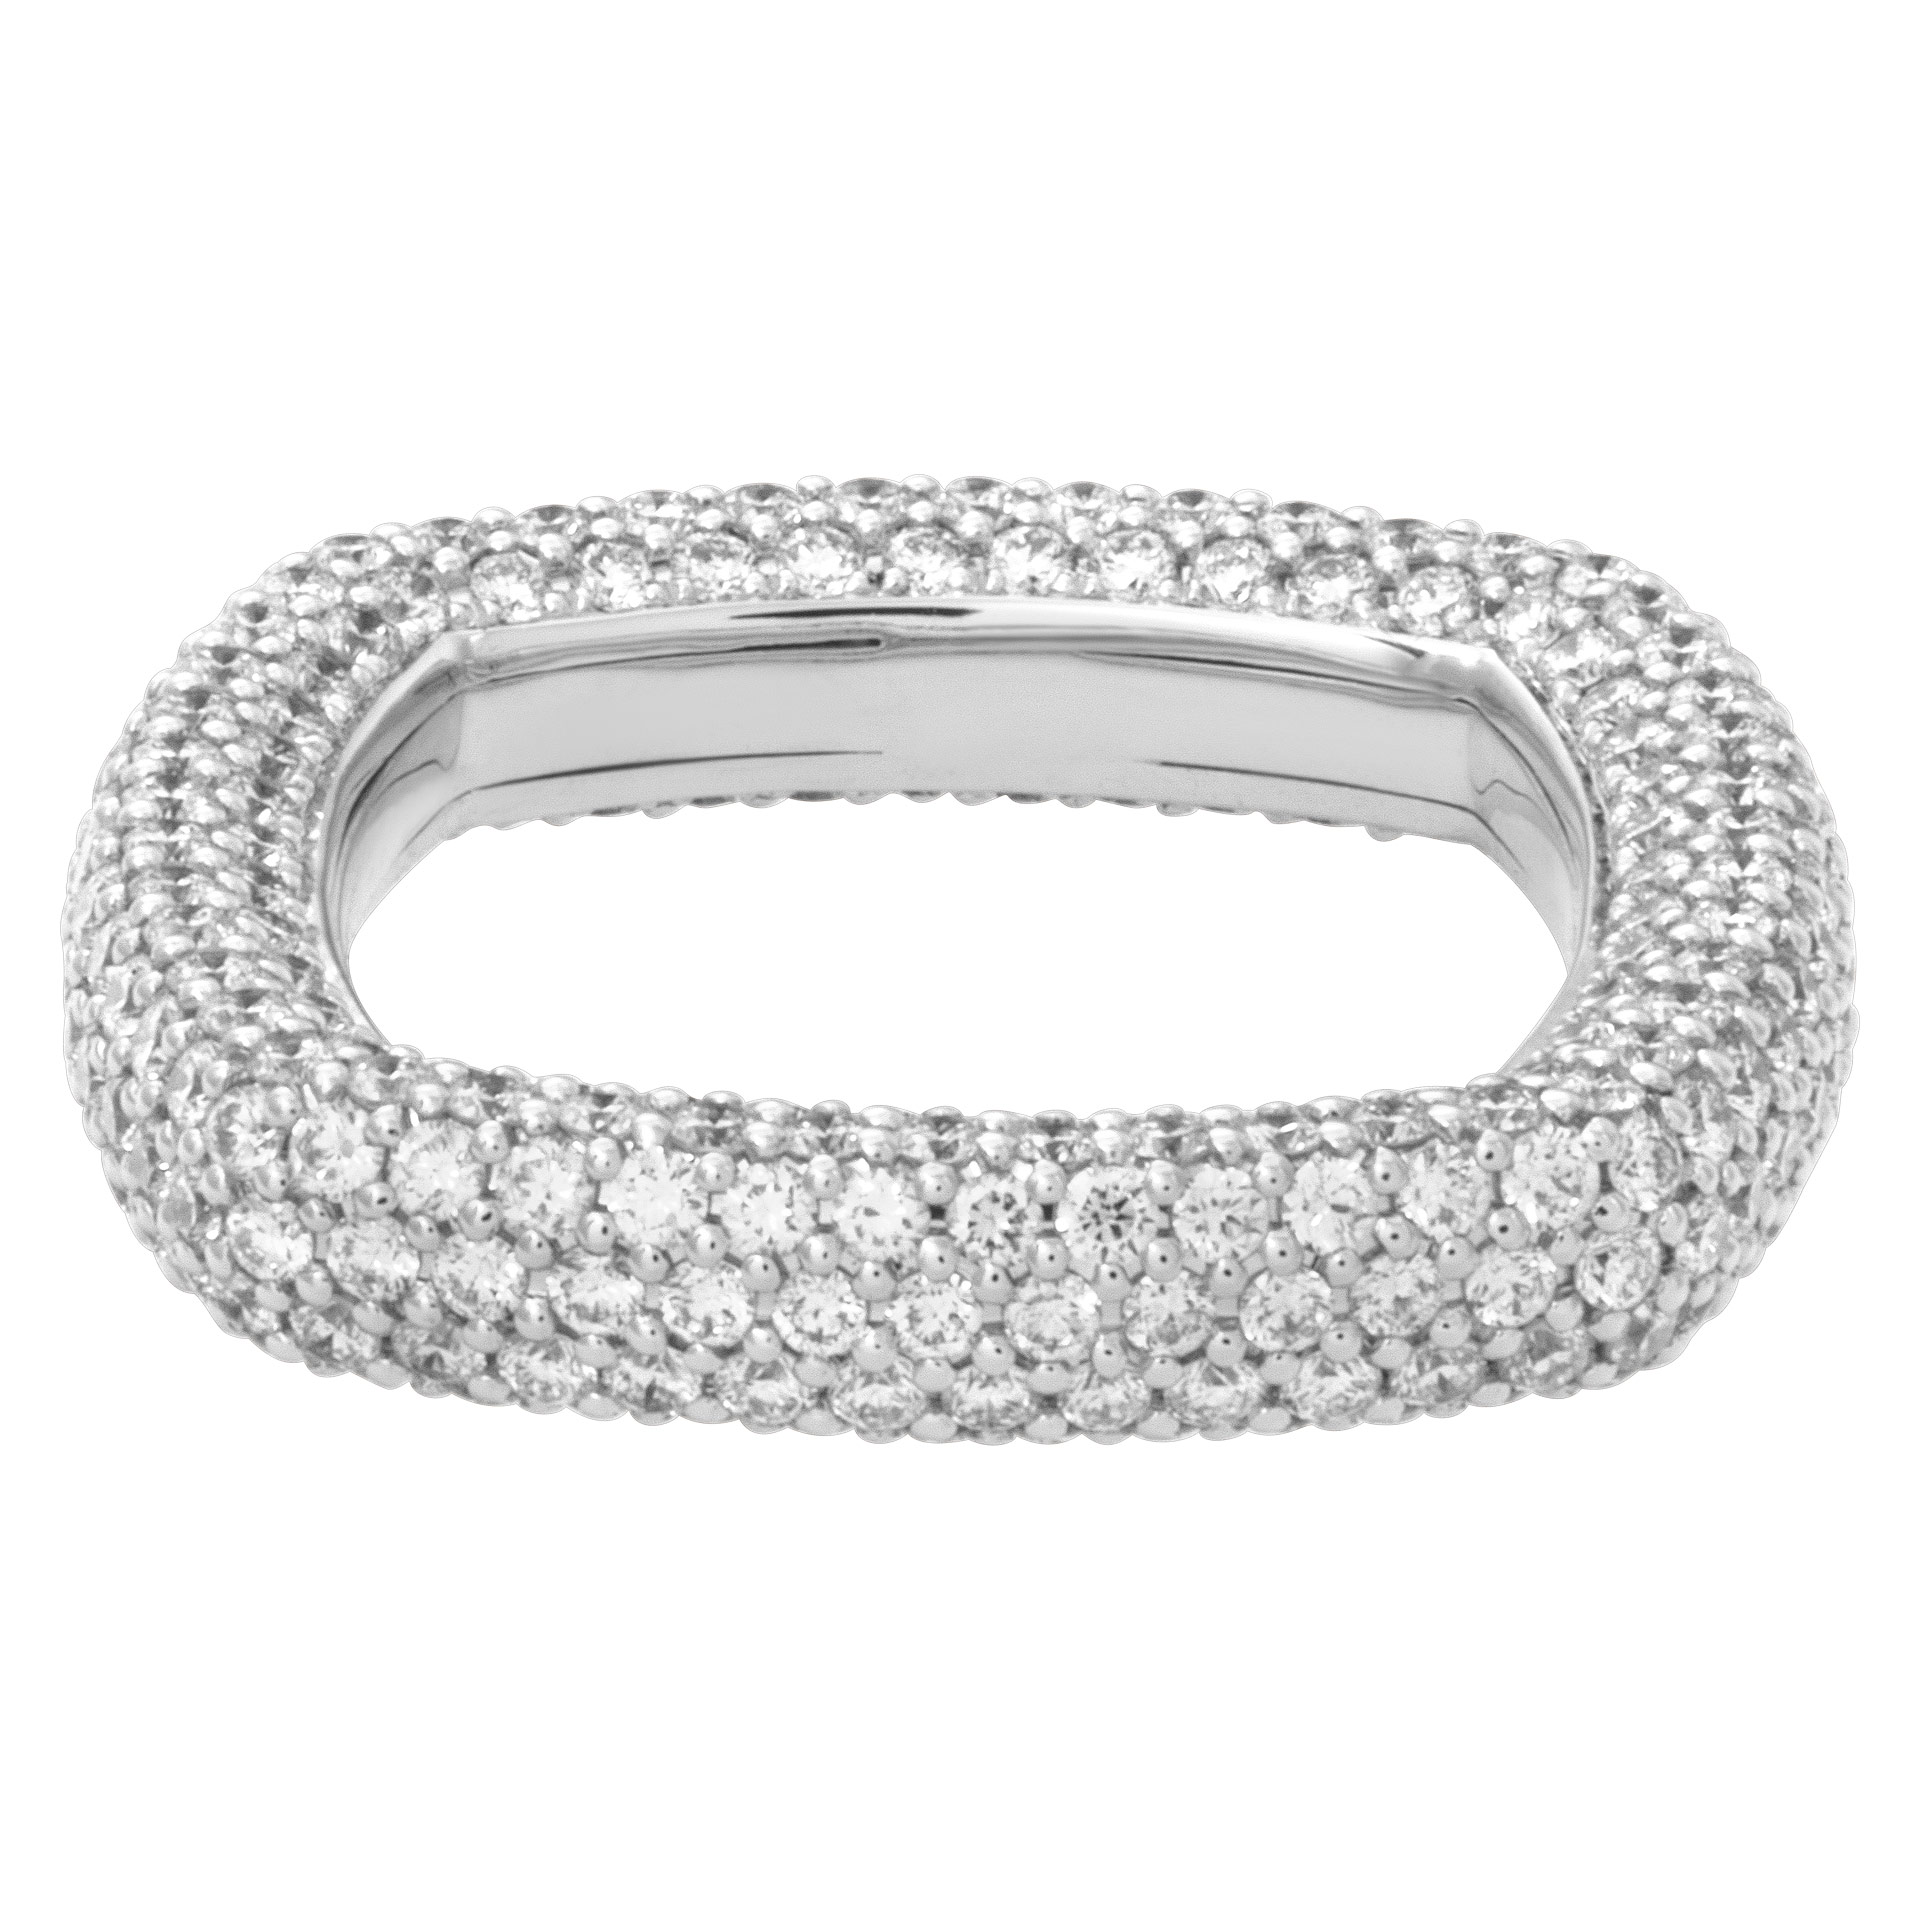 Diamond eternity pave square in 18k white gold with approximately 3.26 carats